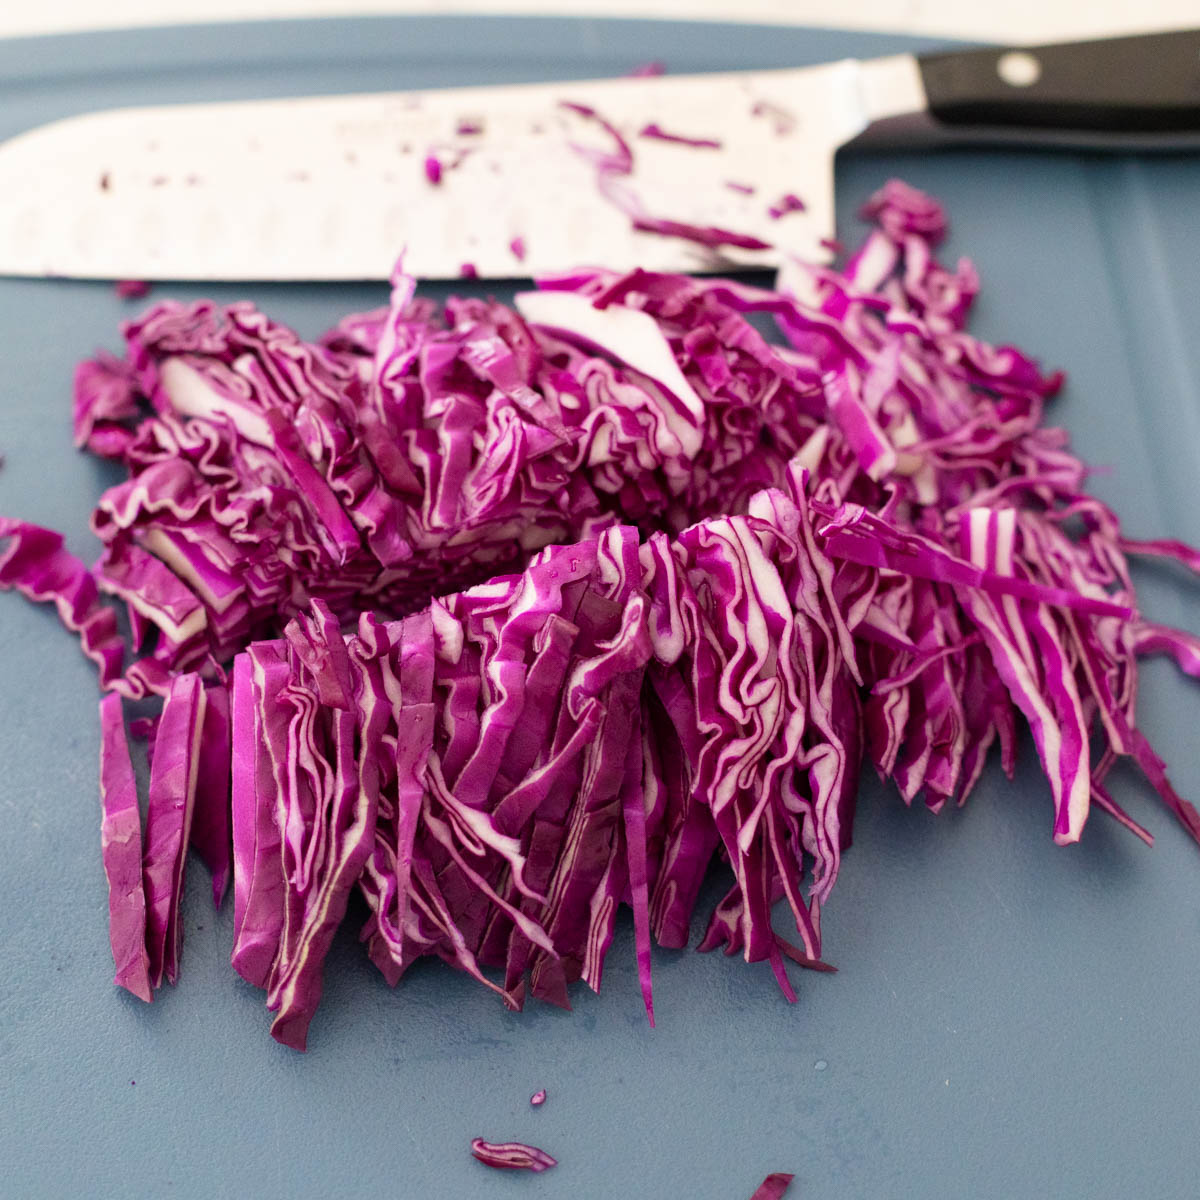 The thin strips of cabbage have been sliced in half again to make them shorter.